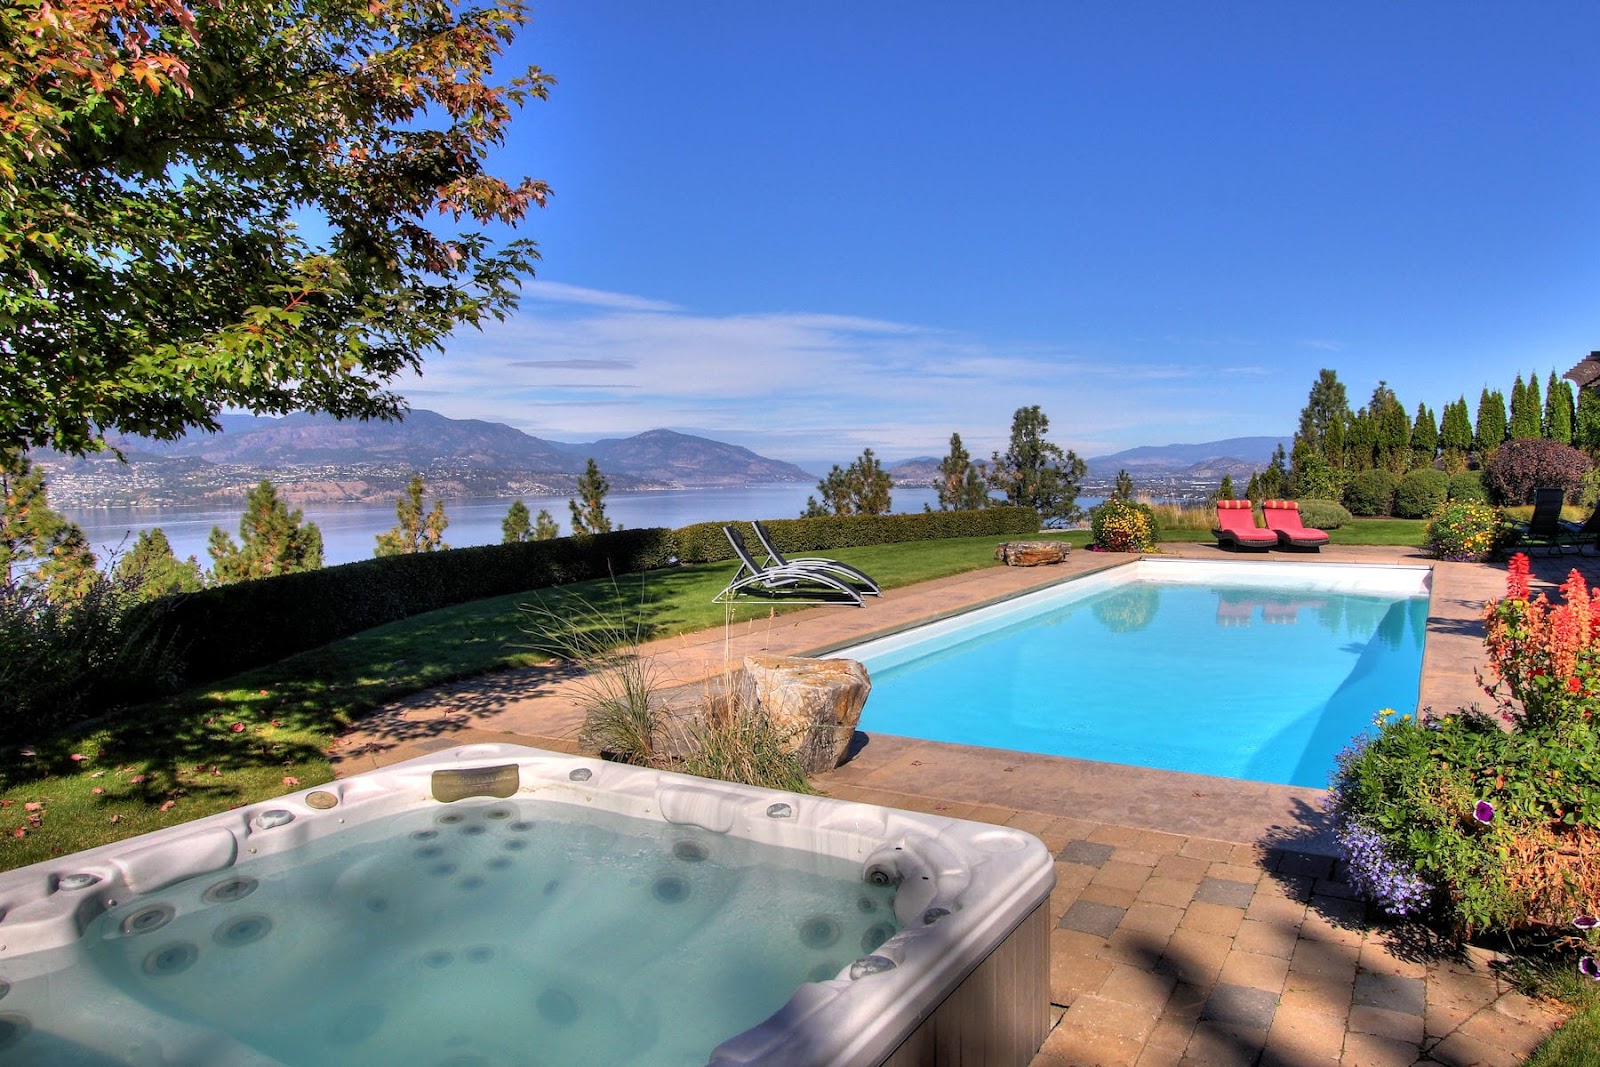 A hot tub and pool side by side on a property set on the hillside with a view of Okanagan Lake in the background.